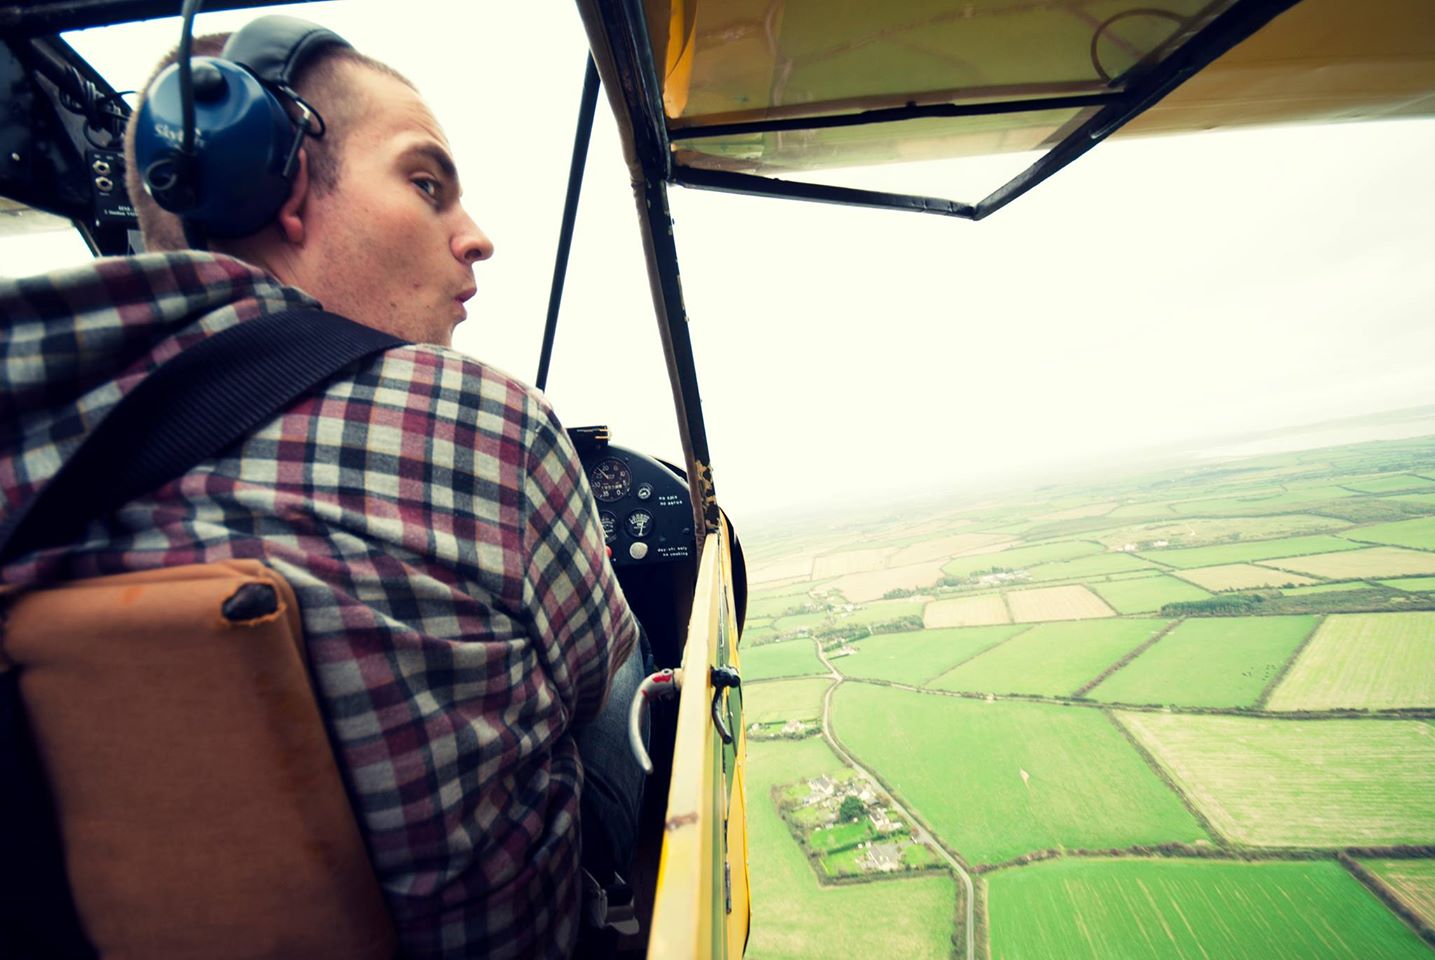 Piper Cub G-BJEI with Brian and Neil over Waterford. Photo by Neil Sheehan.